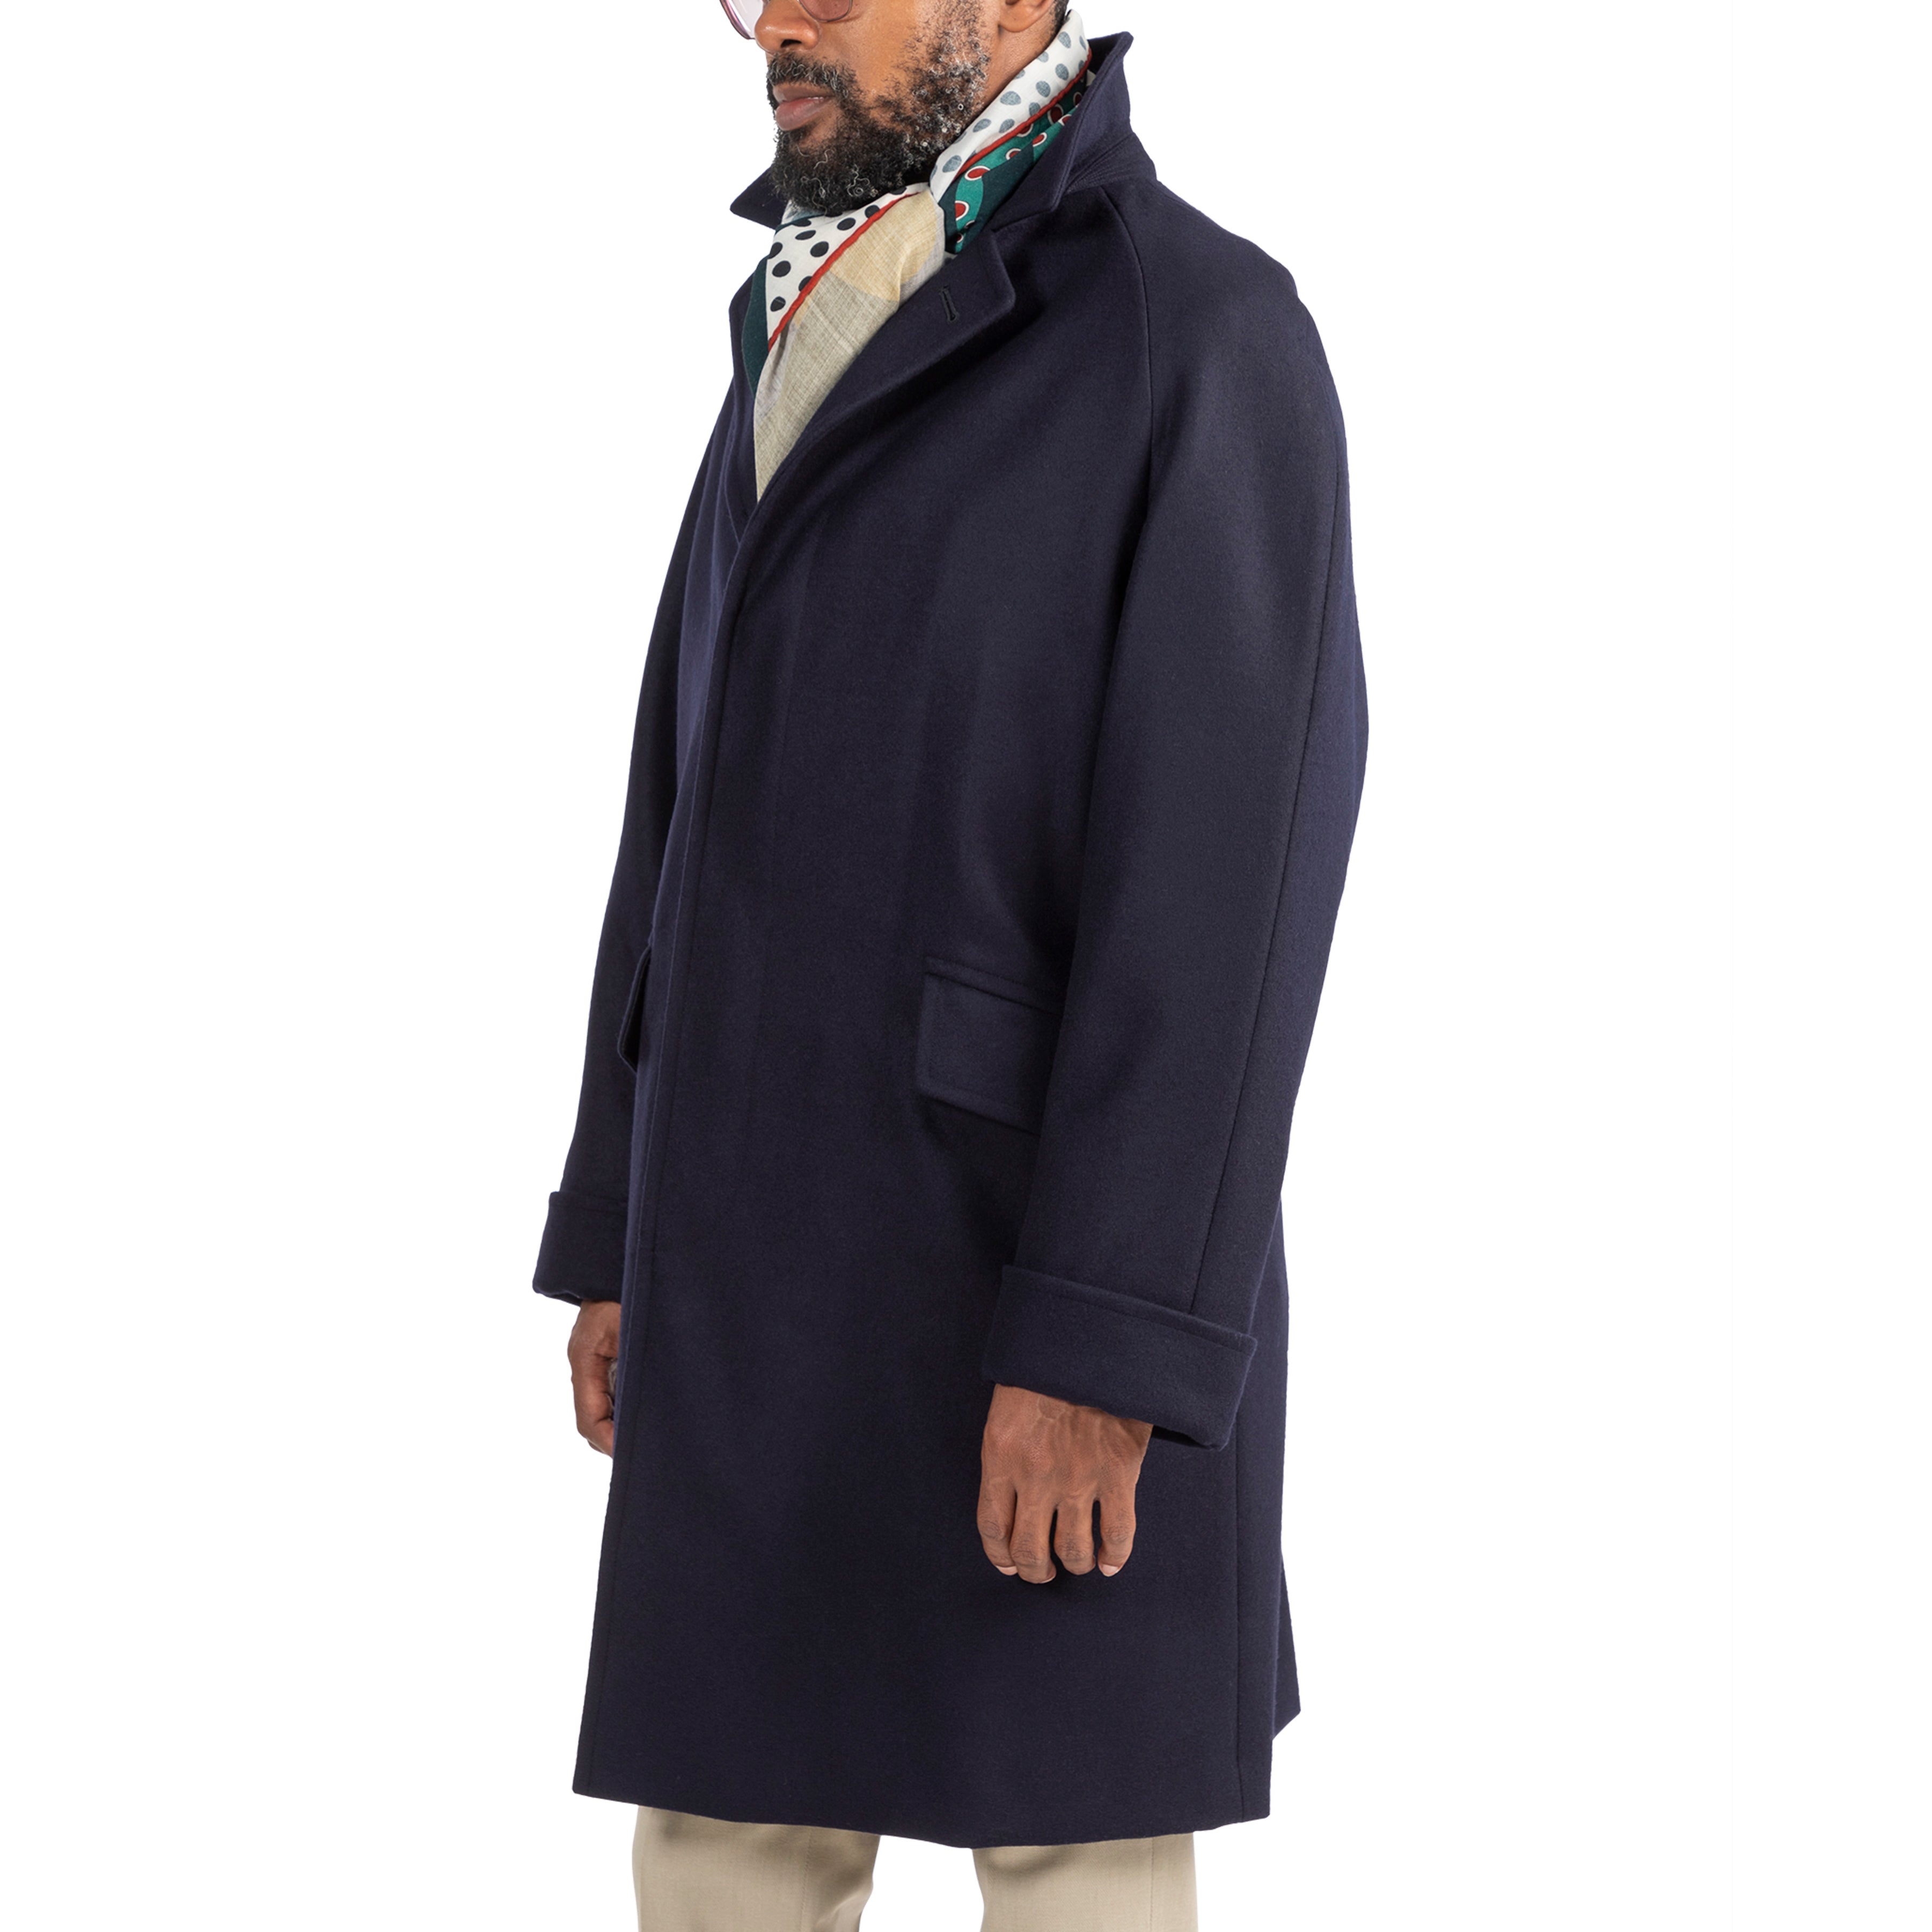 Corb Wool/Cashmere Melton Jersey Coat - The Armoury